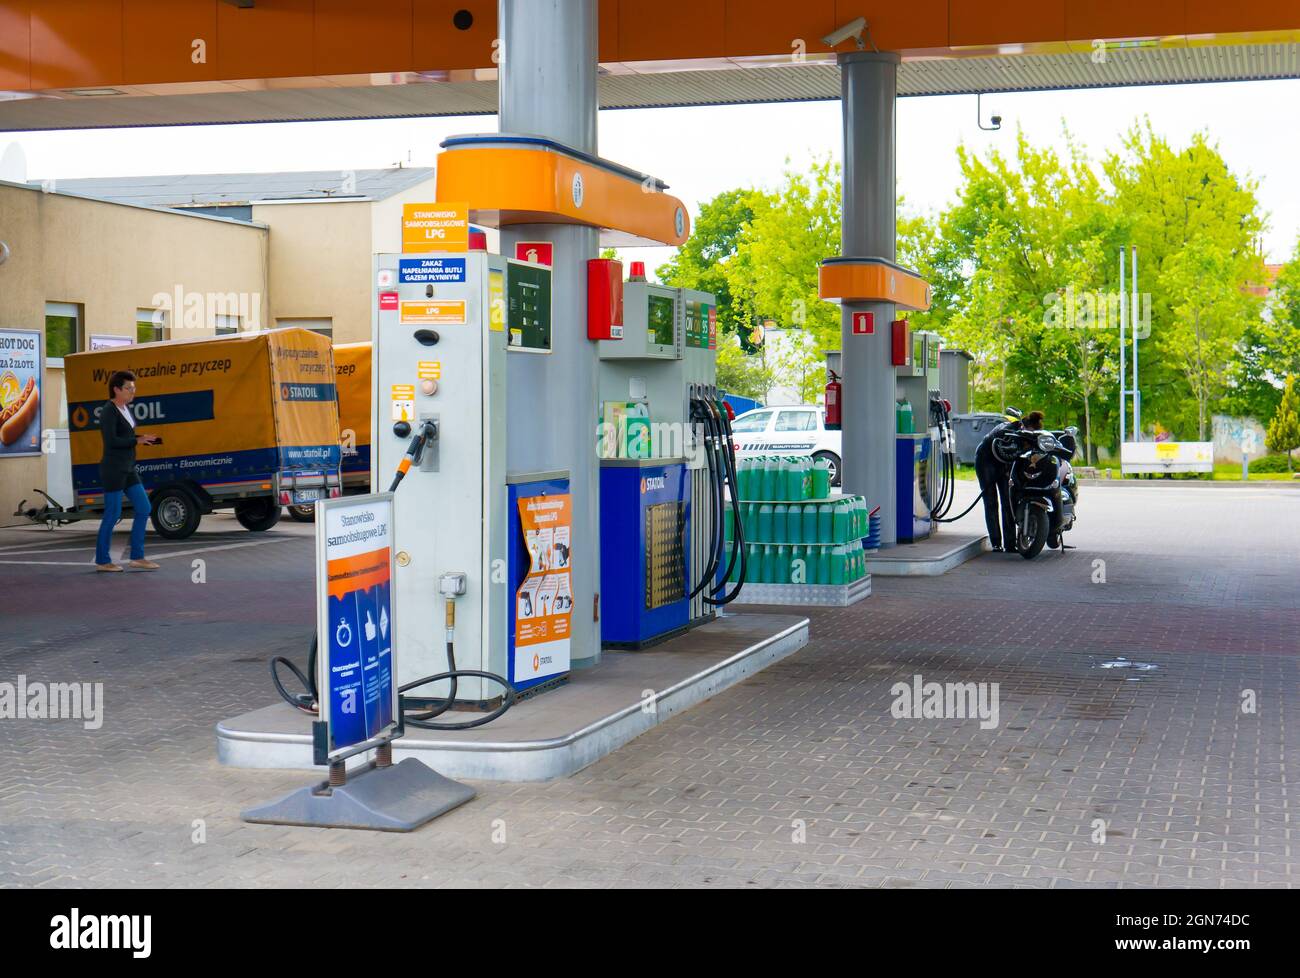 POZNAN, POLAND - Sep 01, 2021: The Old Statoil company gas station fuel pumps. Stock Photo